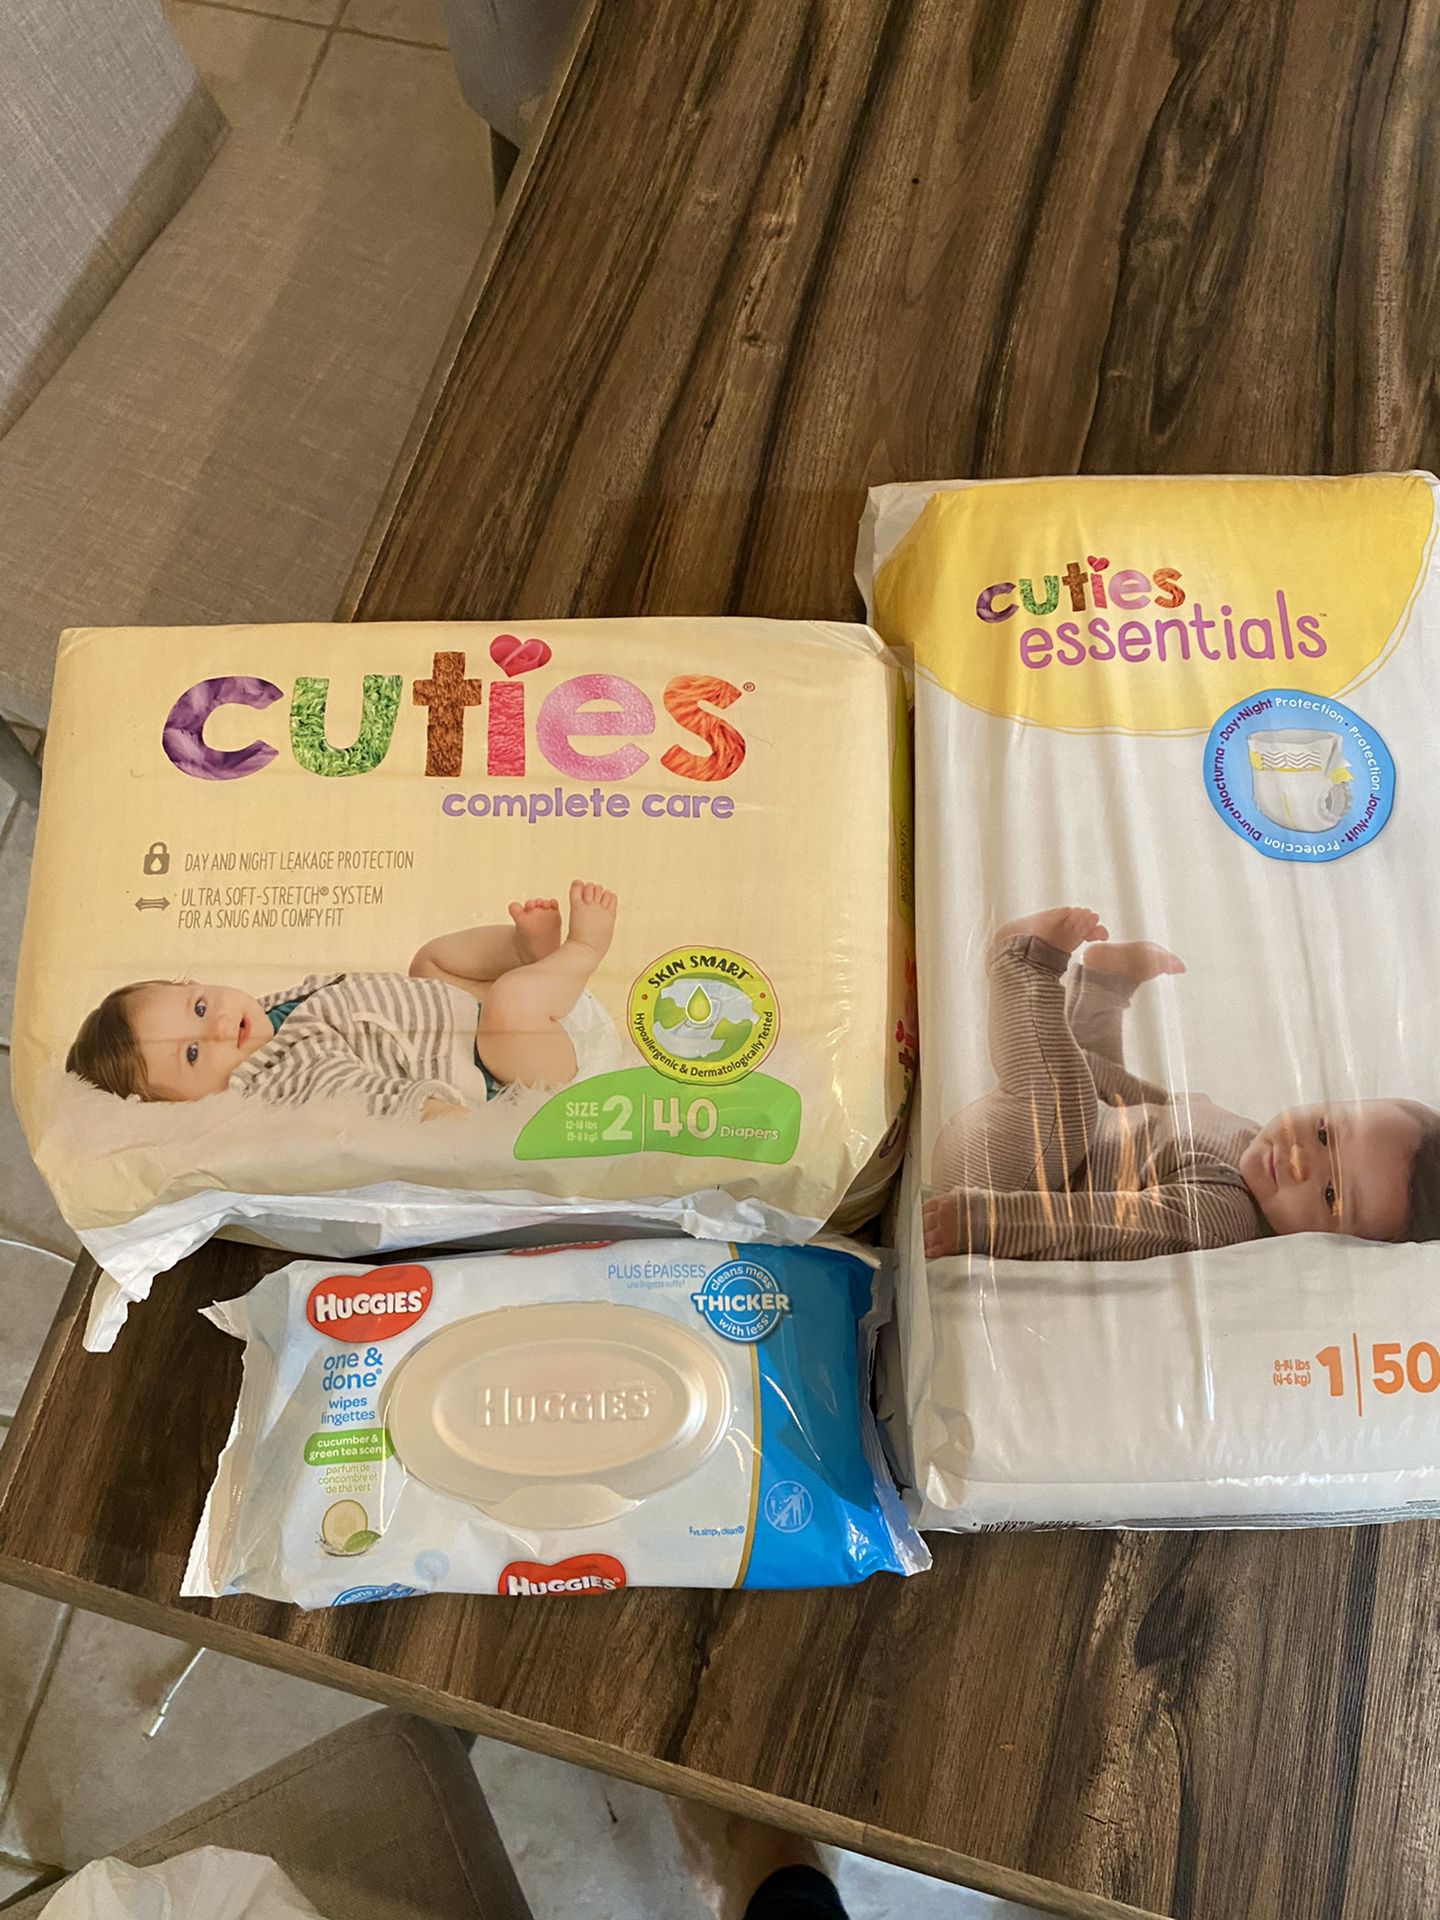 Cuties Diapers and Huggies baby wipes